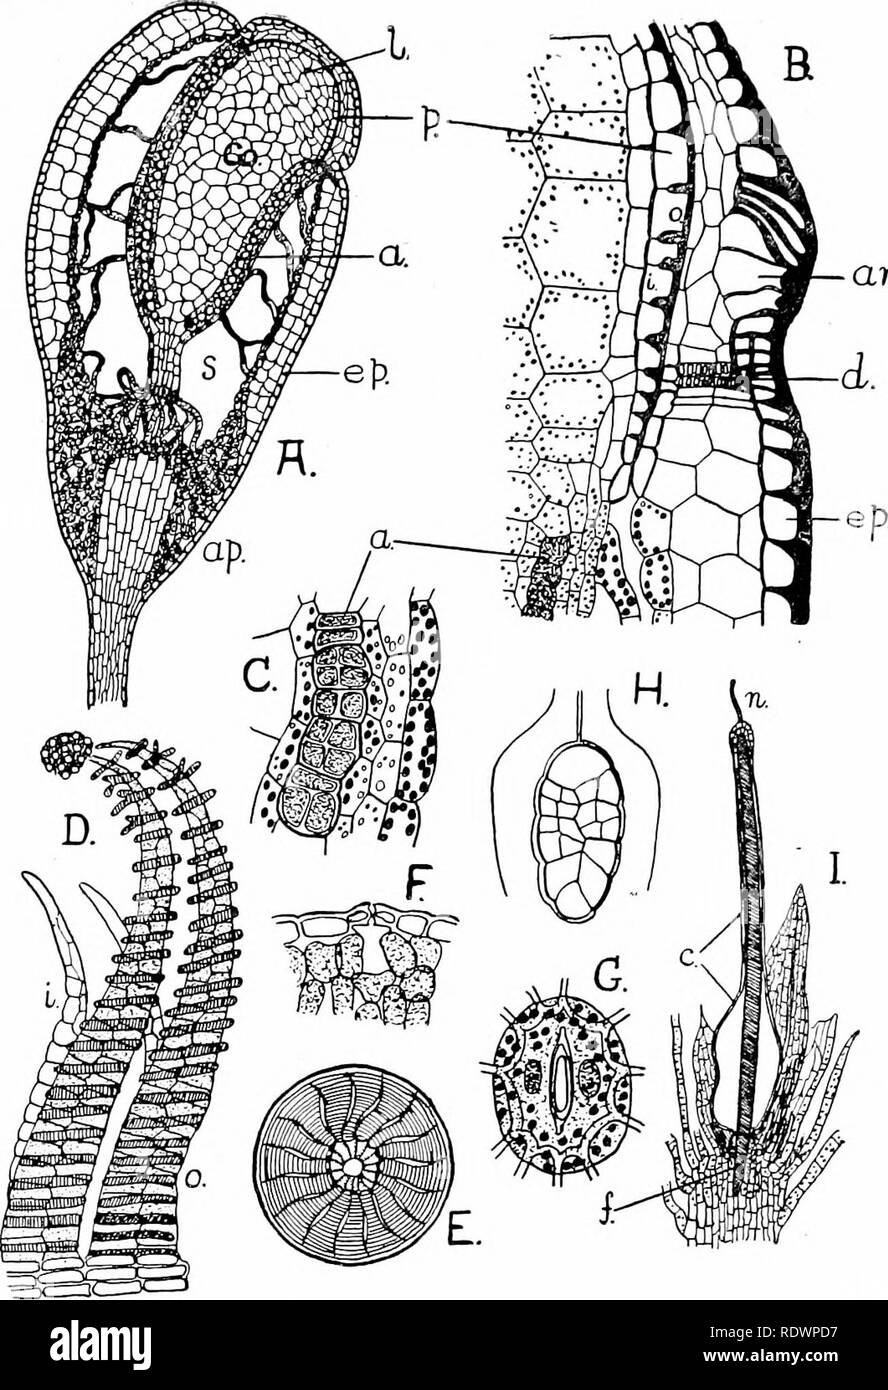 . An introduction to the structure and reproduction of plants. Plant anatomy; Plants. an.. Fig. 156.—Structure and development of the lloss-sporogonium (all figures, except F, represent Fiinaria hygrometrica). A, Longitudinal section through young capsule, apophysis (ap.), and the top of the stalk. B, Part of the capsule in the region of the lid, much enlarged. C, Small part of archesporium and spore sack, enlarged. D, Two pairs of peristome-teeth (inner and outer). F, Aperture of dehisced capsule, showing arrangement of peristome-teeth. F, Section of small part of apophysis of Bryum argenteum Stock Photo